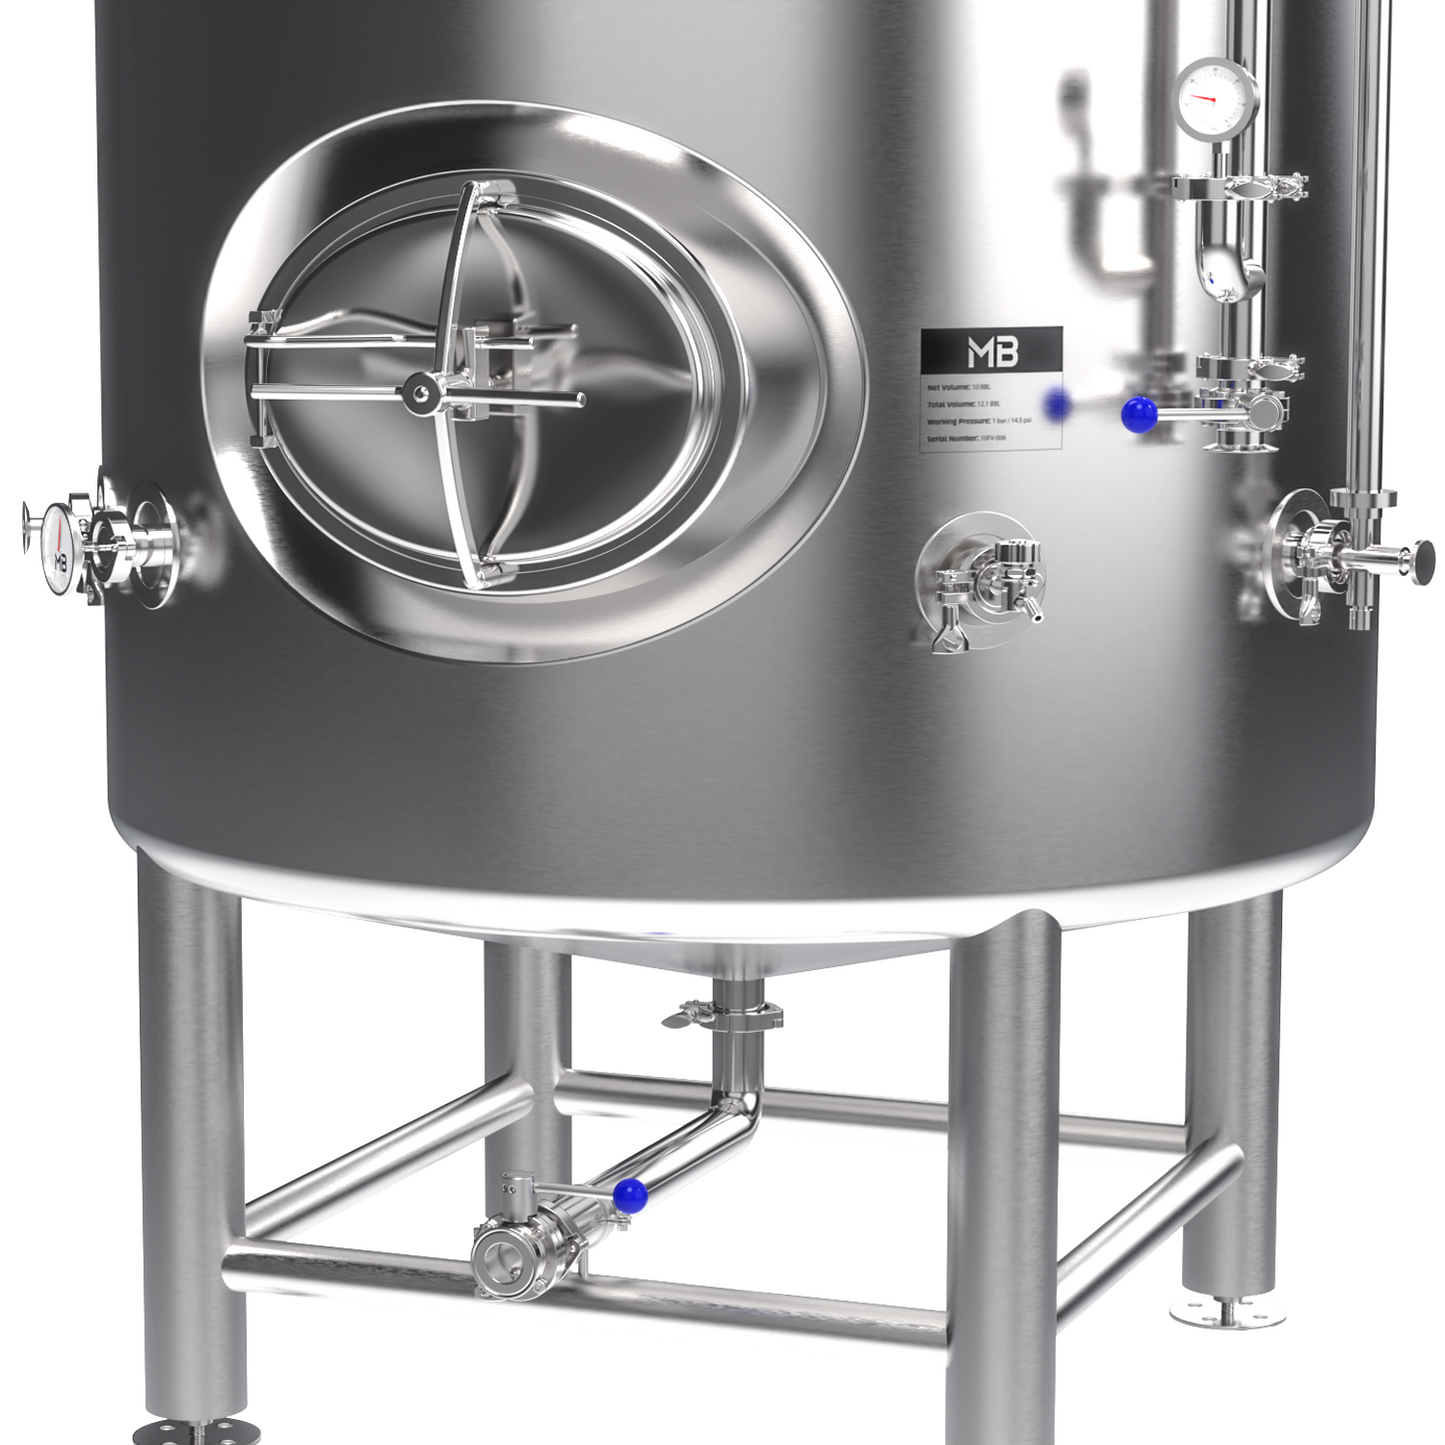 Brite Tank | Jacketed  | 20 bbl